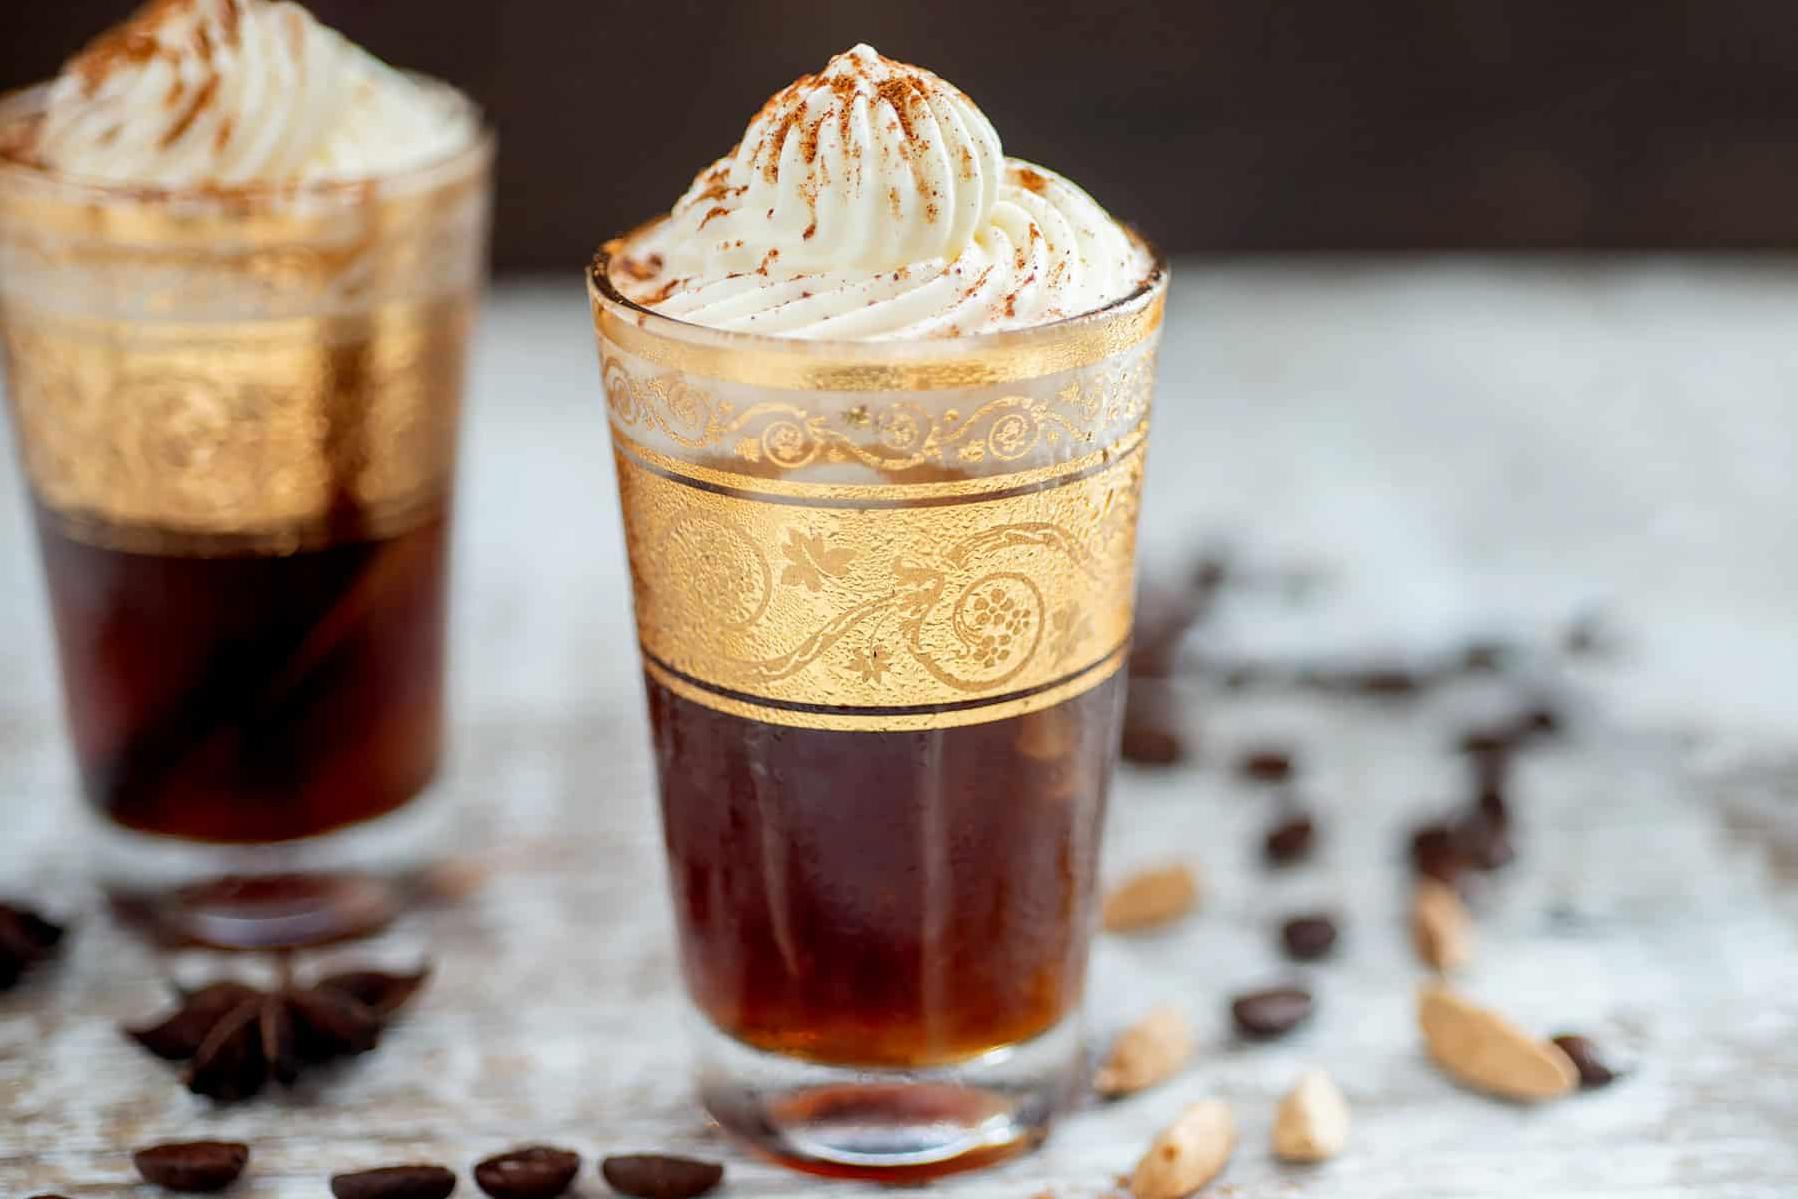  Spice up your coffee routine with this delicious recipe!